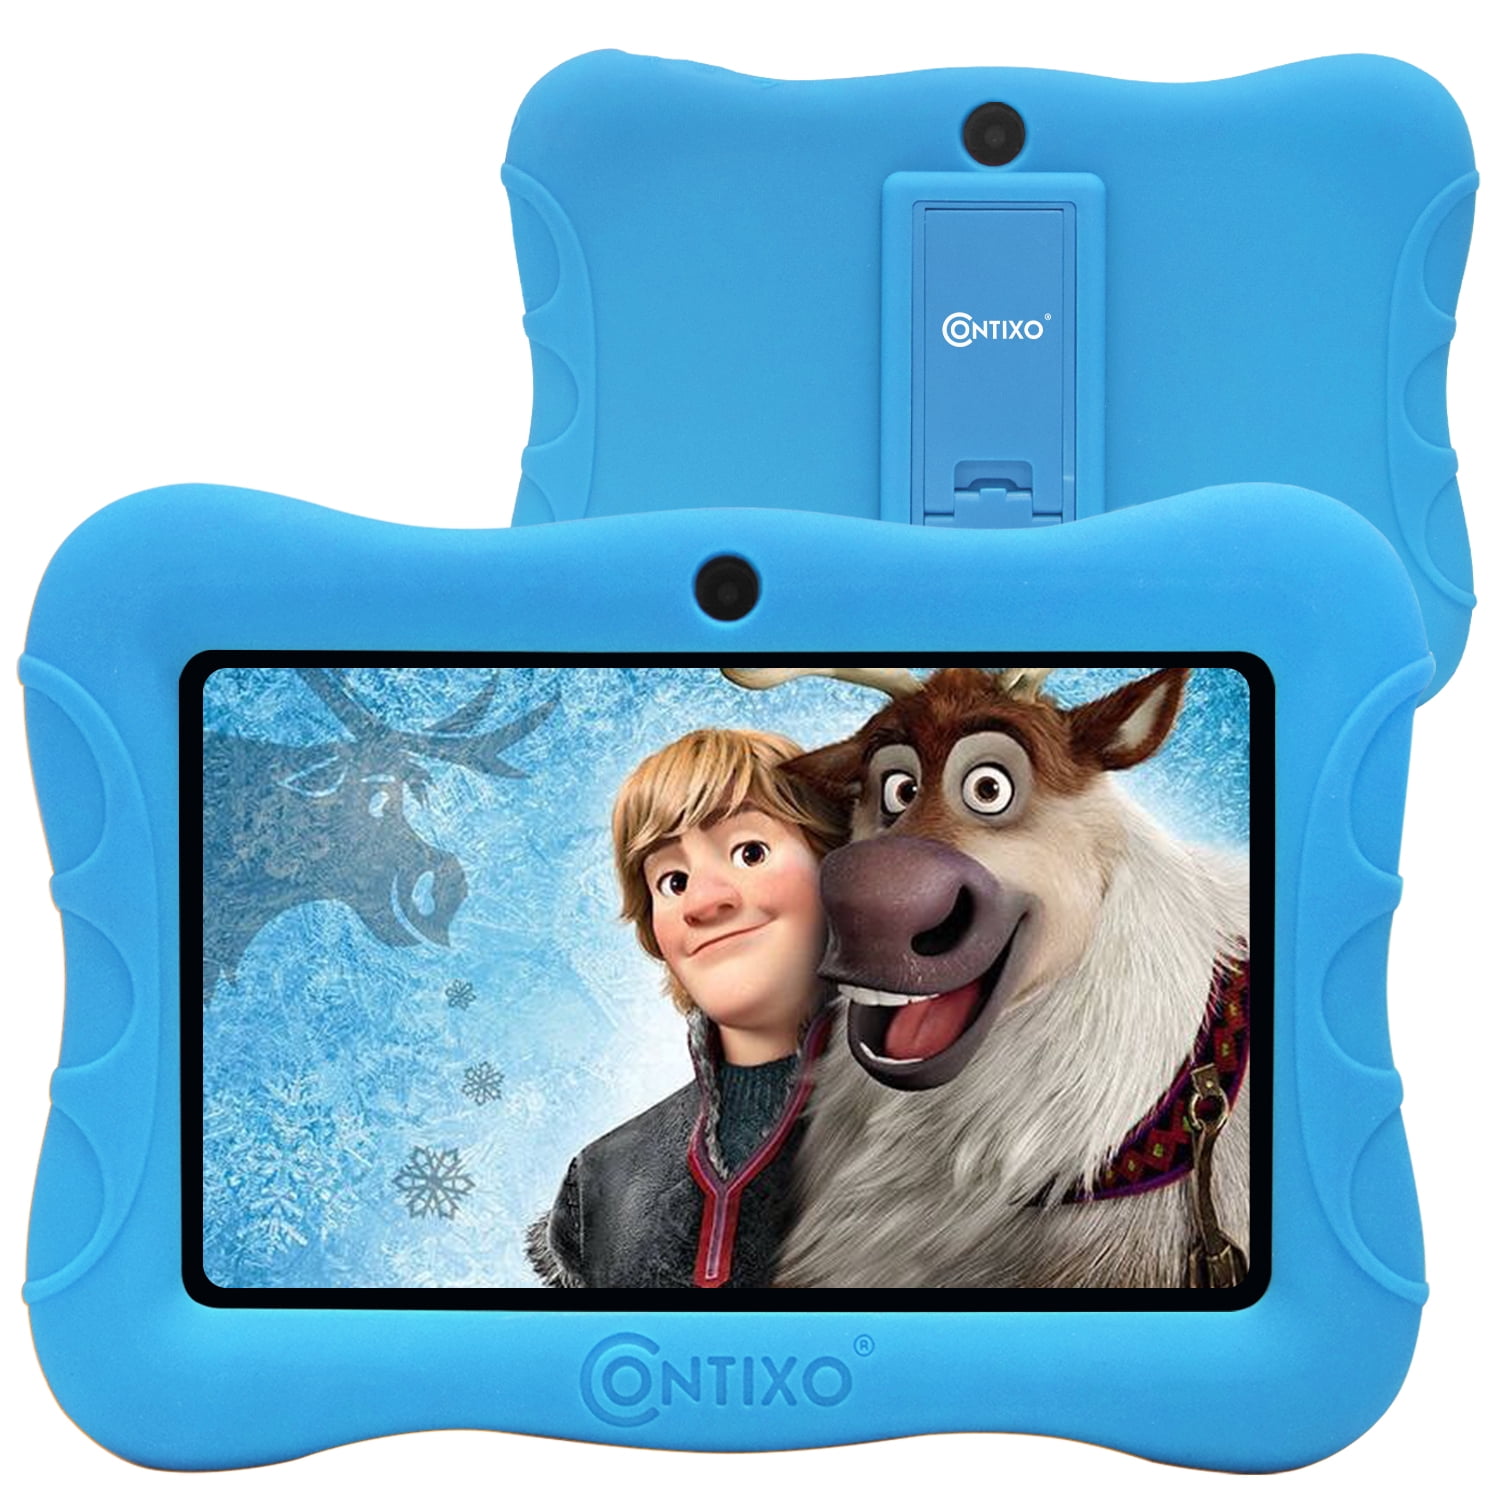 Contixo 7 inch Kids Tablet Android WiFi Camera 16GB Bluetooth Learning Tablet for Toddlers Children Kids Parental Control Pre-Installed Free Education Apps w/Kid-Proof Protective Case, V8-3-ST Blue